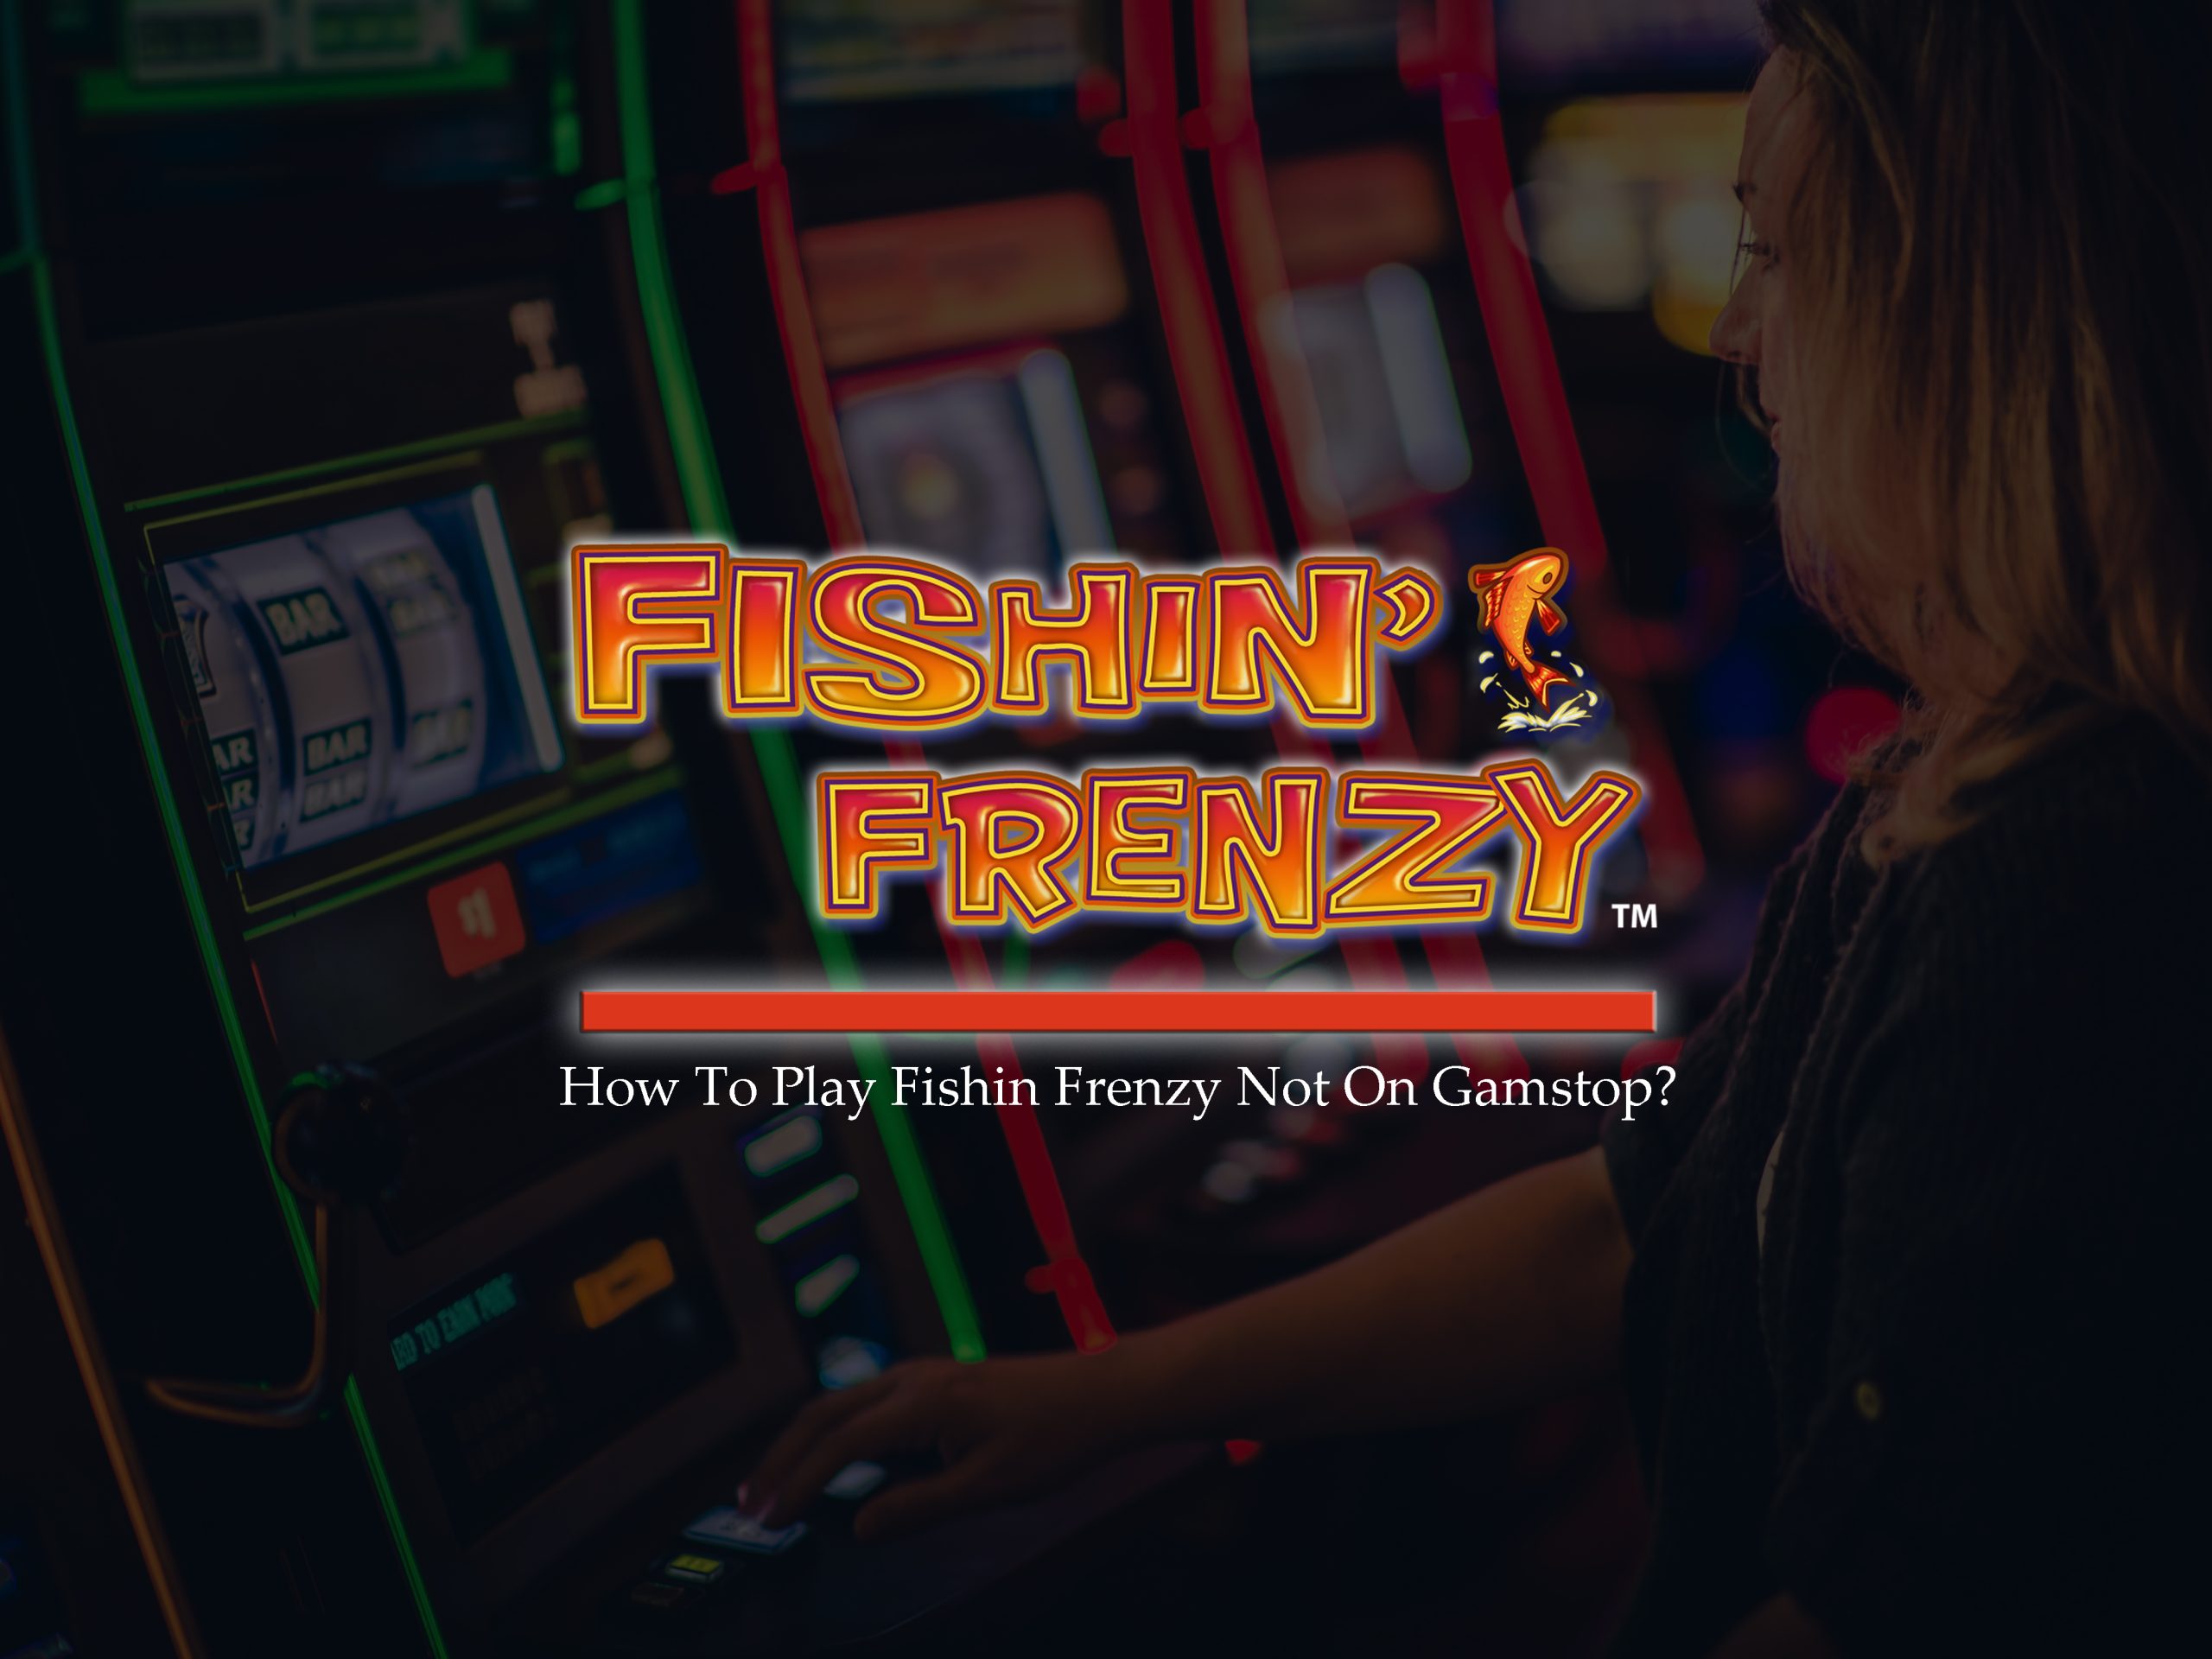 How To Play Fishin Frenzy Not On Gamstop?